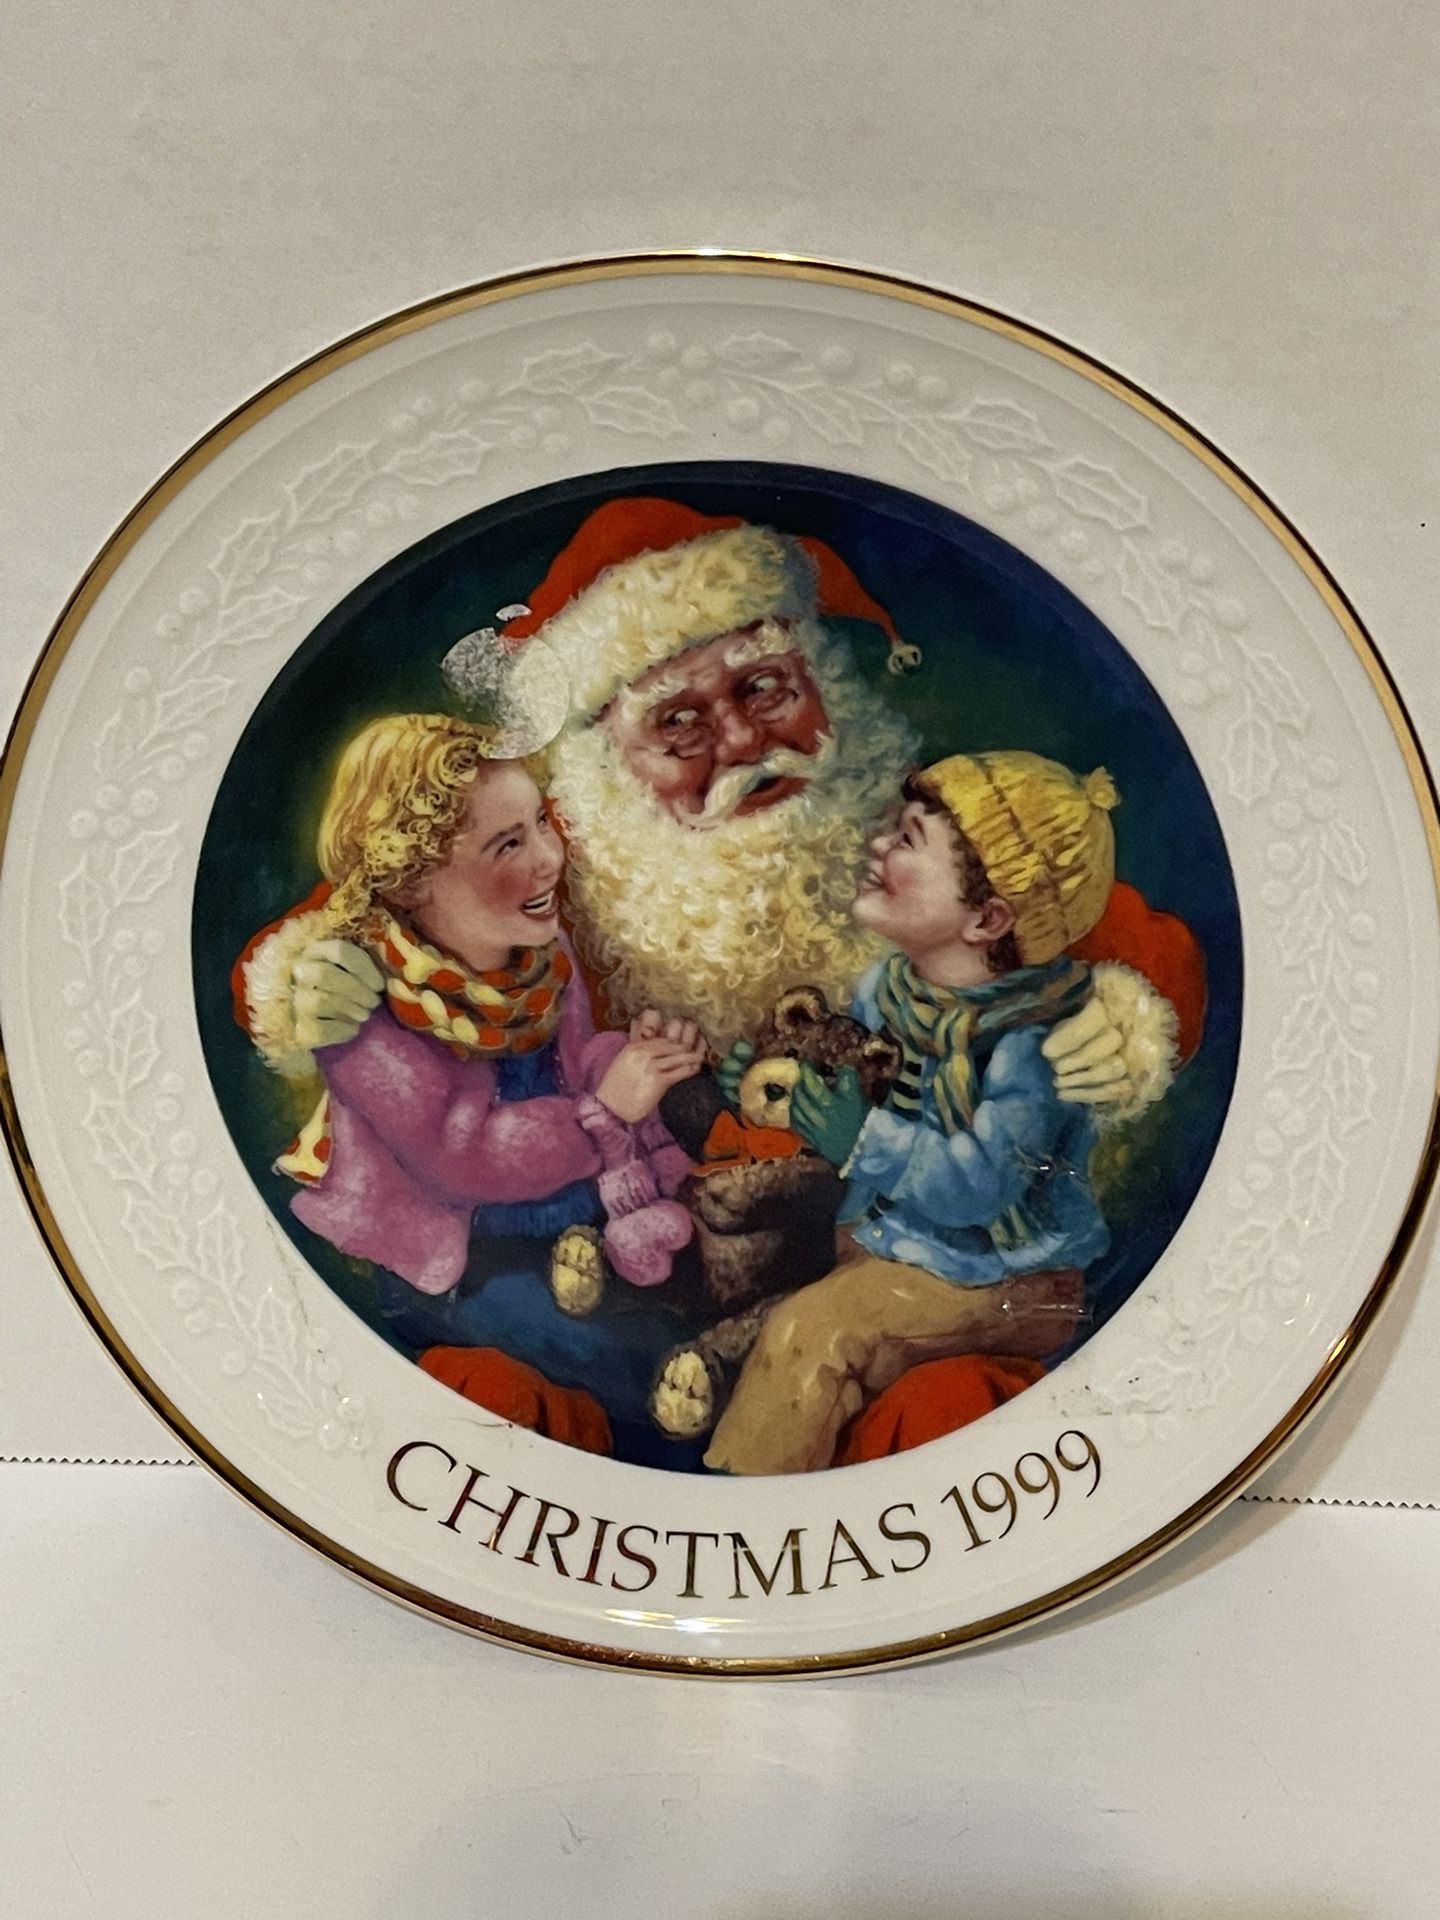 1999 Avon collectable porcelain plate by Robert Sauber.  “Santa’s Tender Moment” with 22k gold trim. 